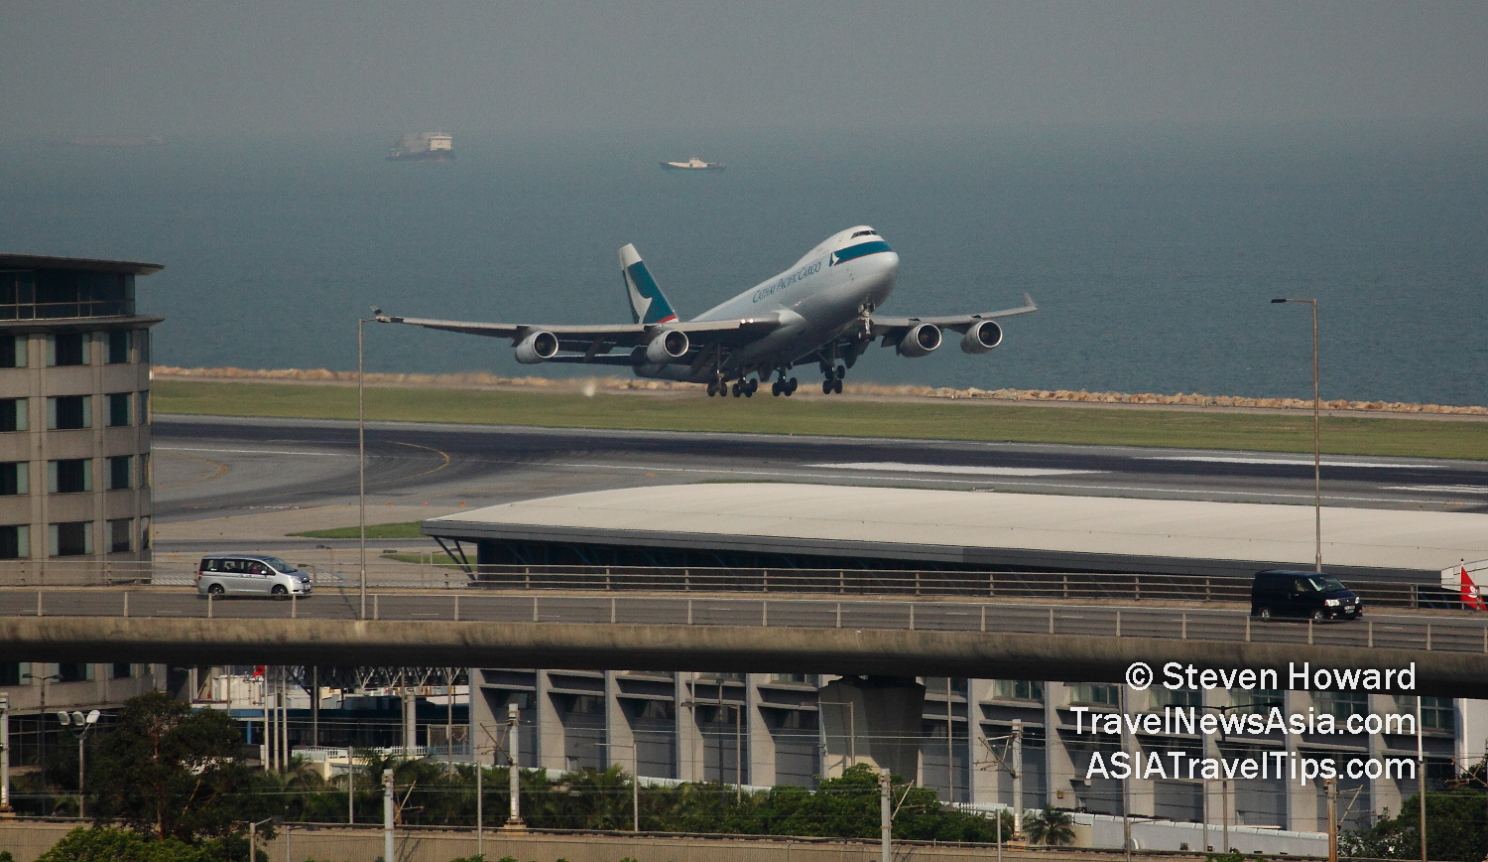 Cathay Pacific Boeing 747F taking off from HKIA. Picture by Steven Howard of TravelNewsAsia.com Click to enlarge.